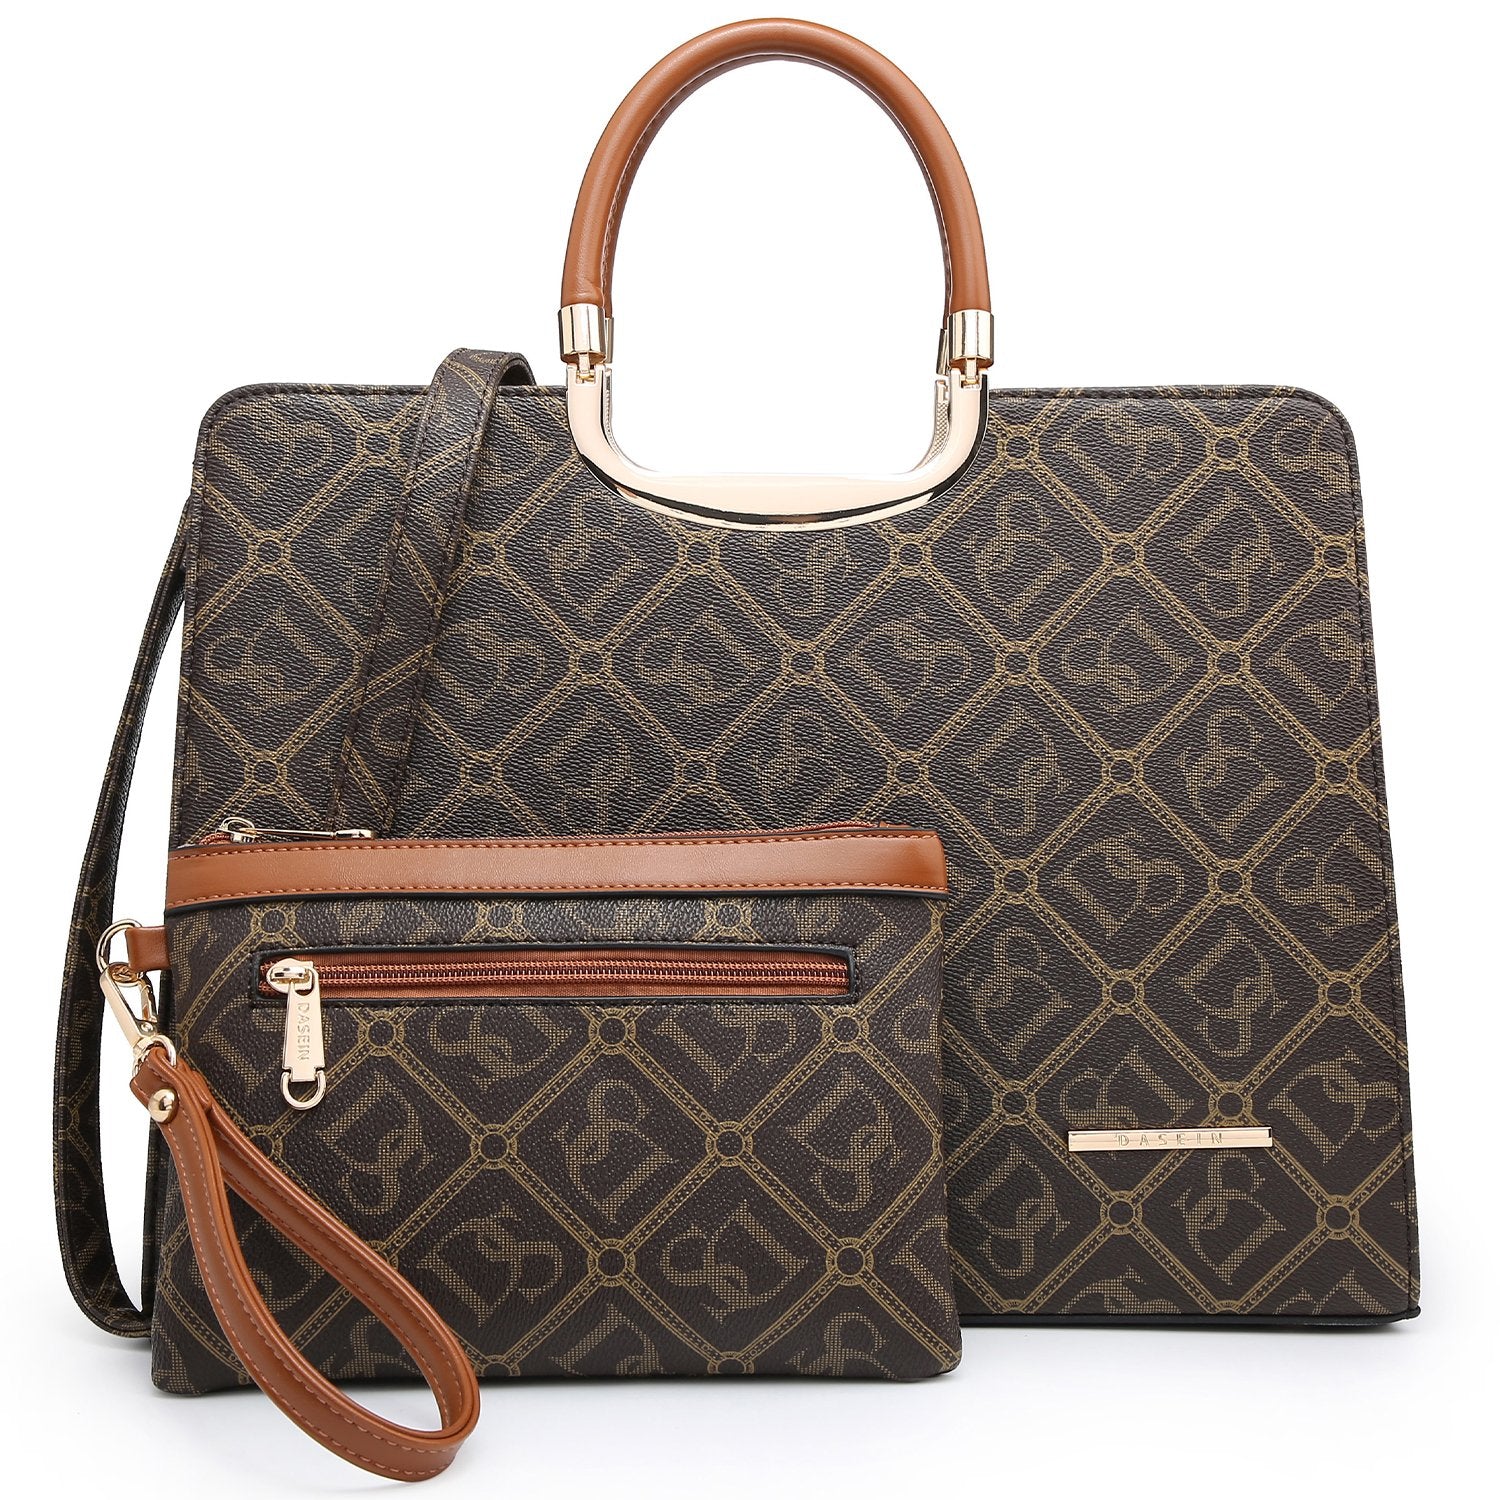 Monogram Briefcase with Matching Wristlet